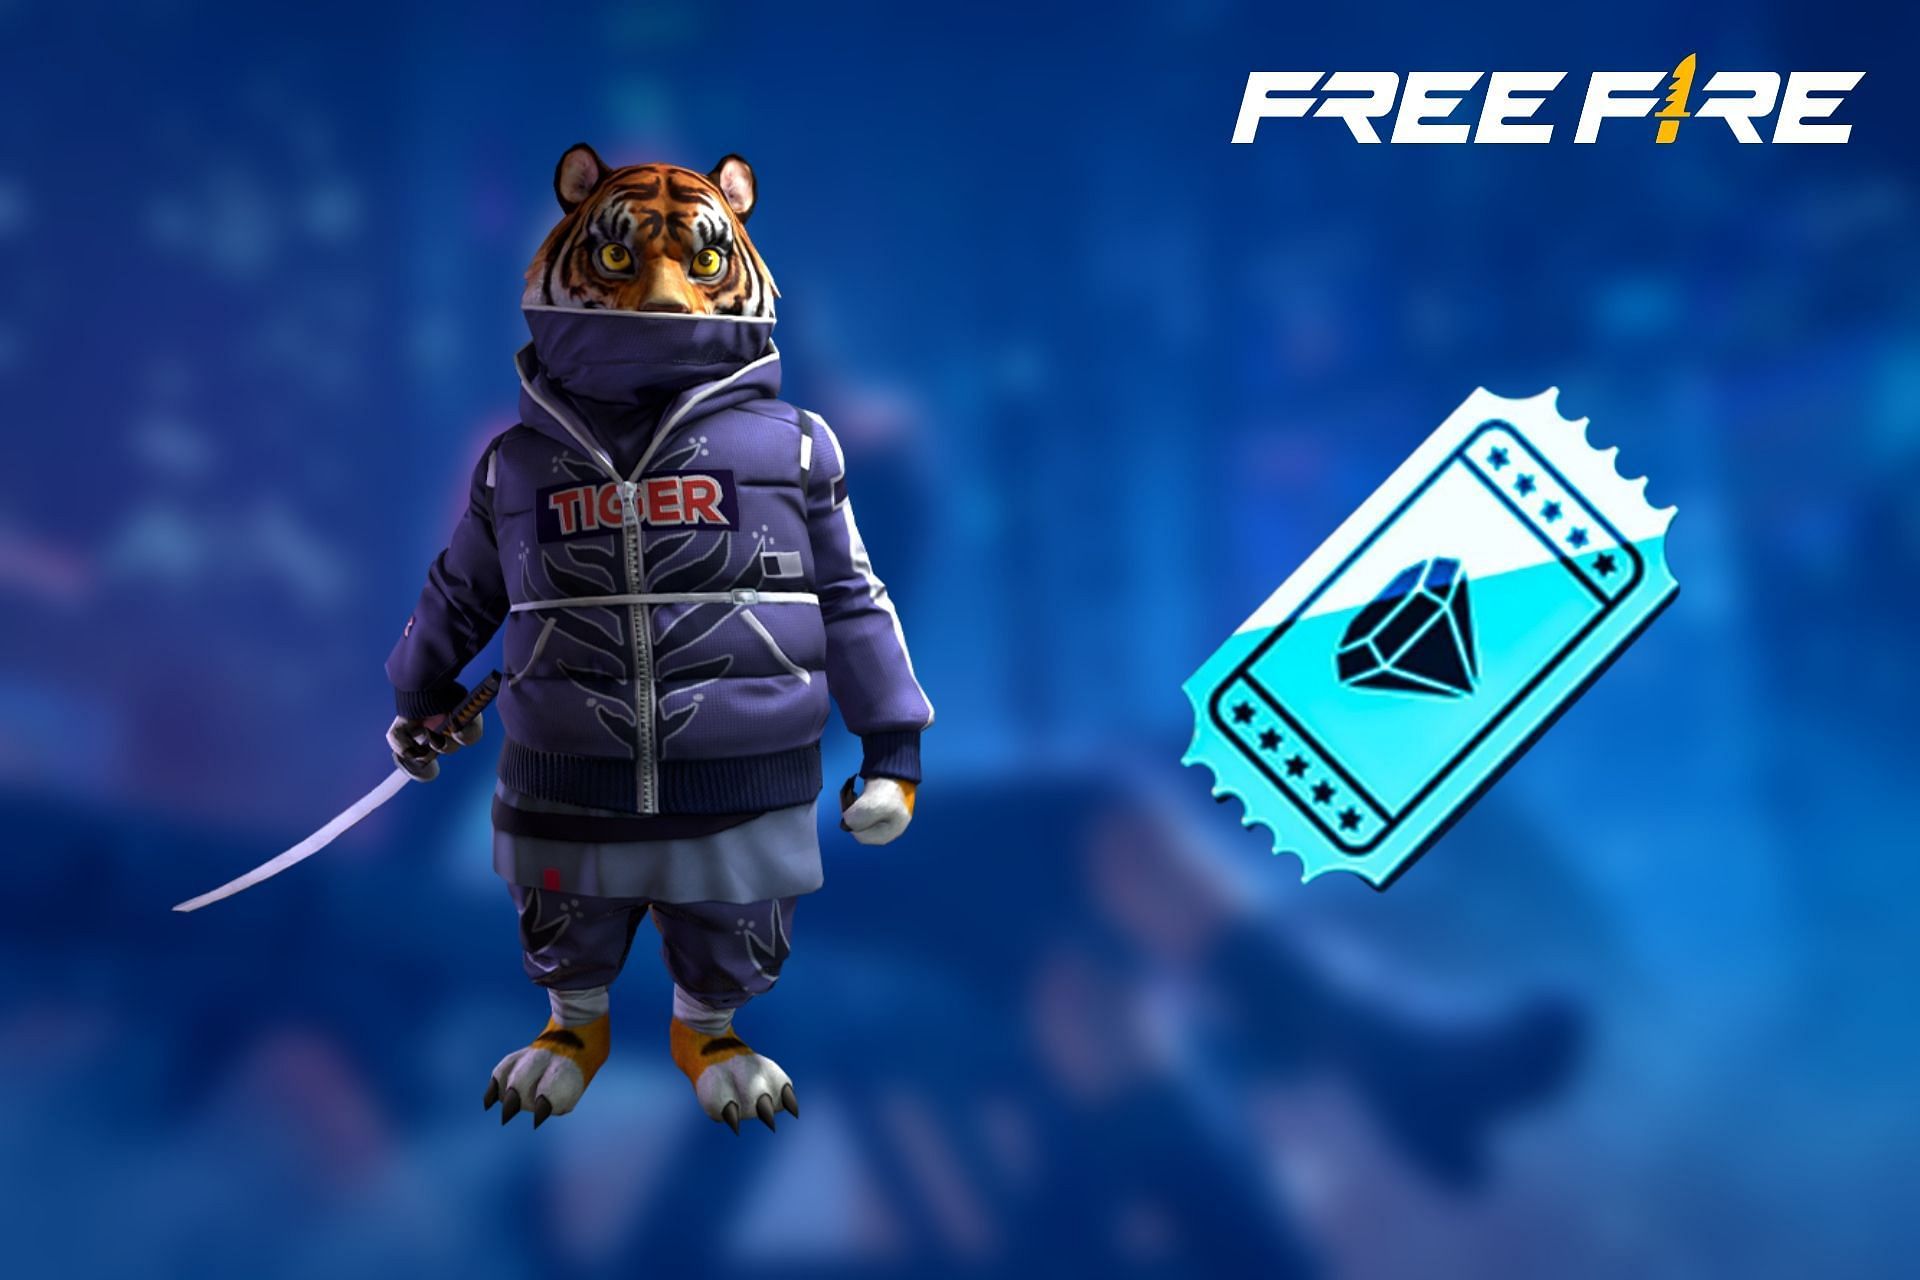 Here are the Free Fire redeem codes for free pets and vouchers (Image via Sportskeeda)